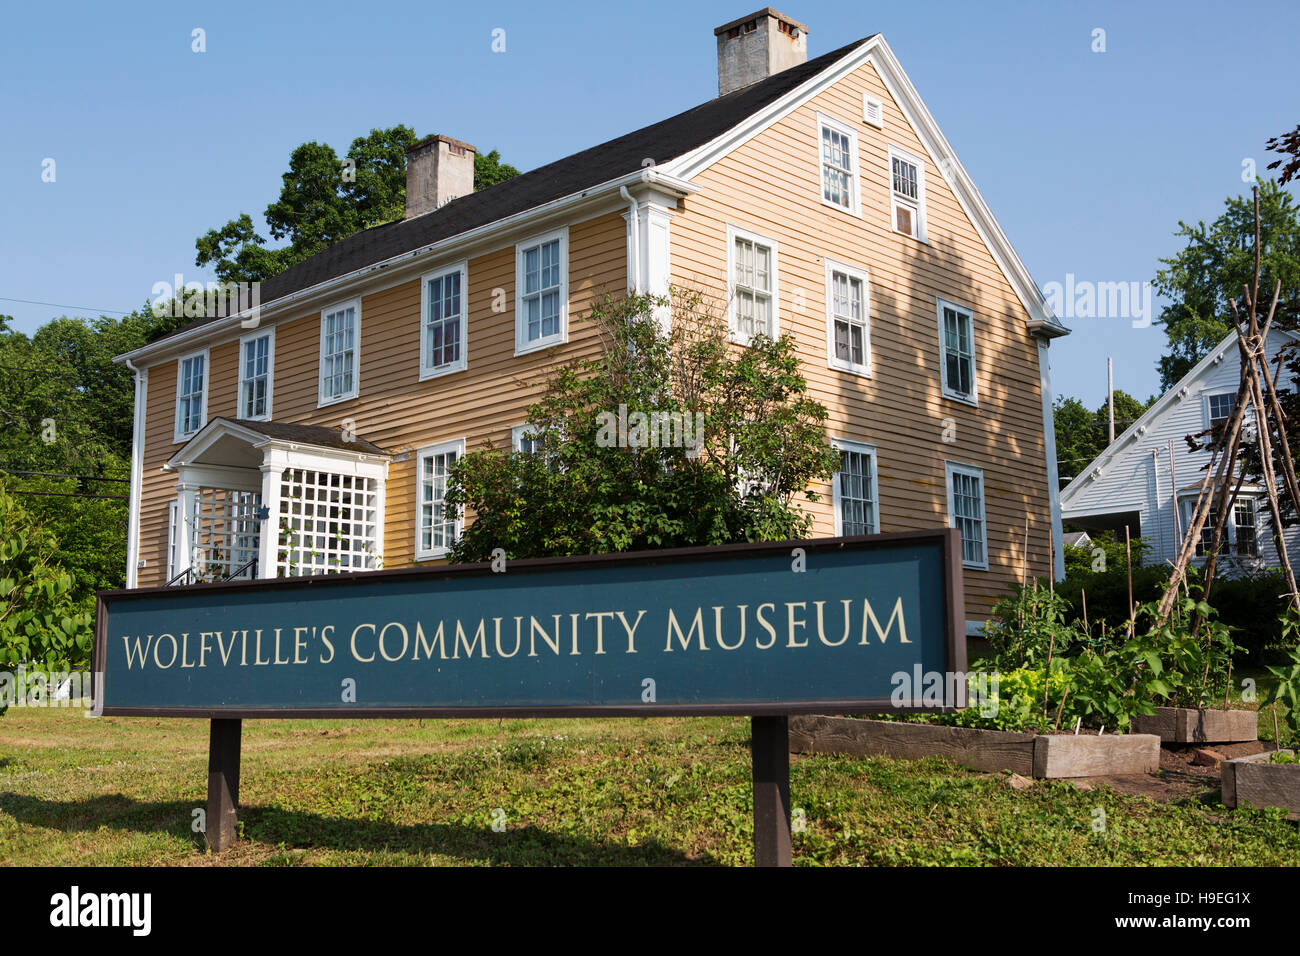 Randall House in Wolfville, Nova Scotia, Canada. The building houses Wolfville's Community Museum. Stock Photo